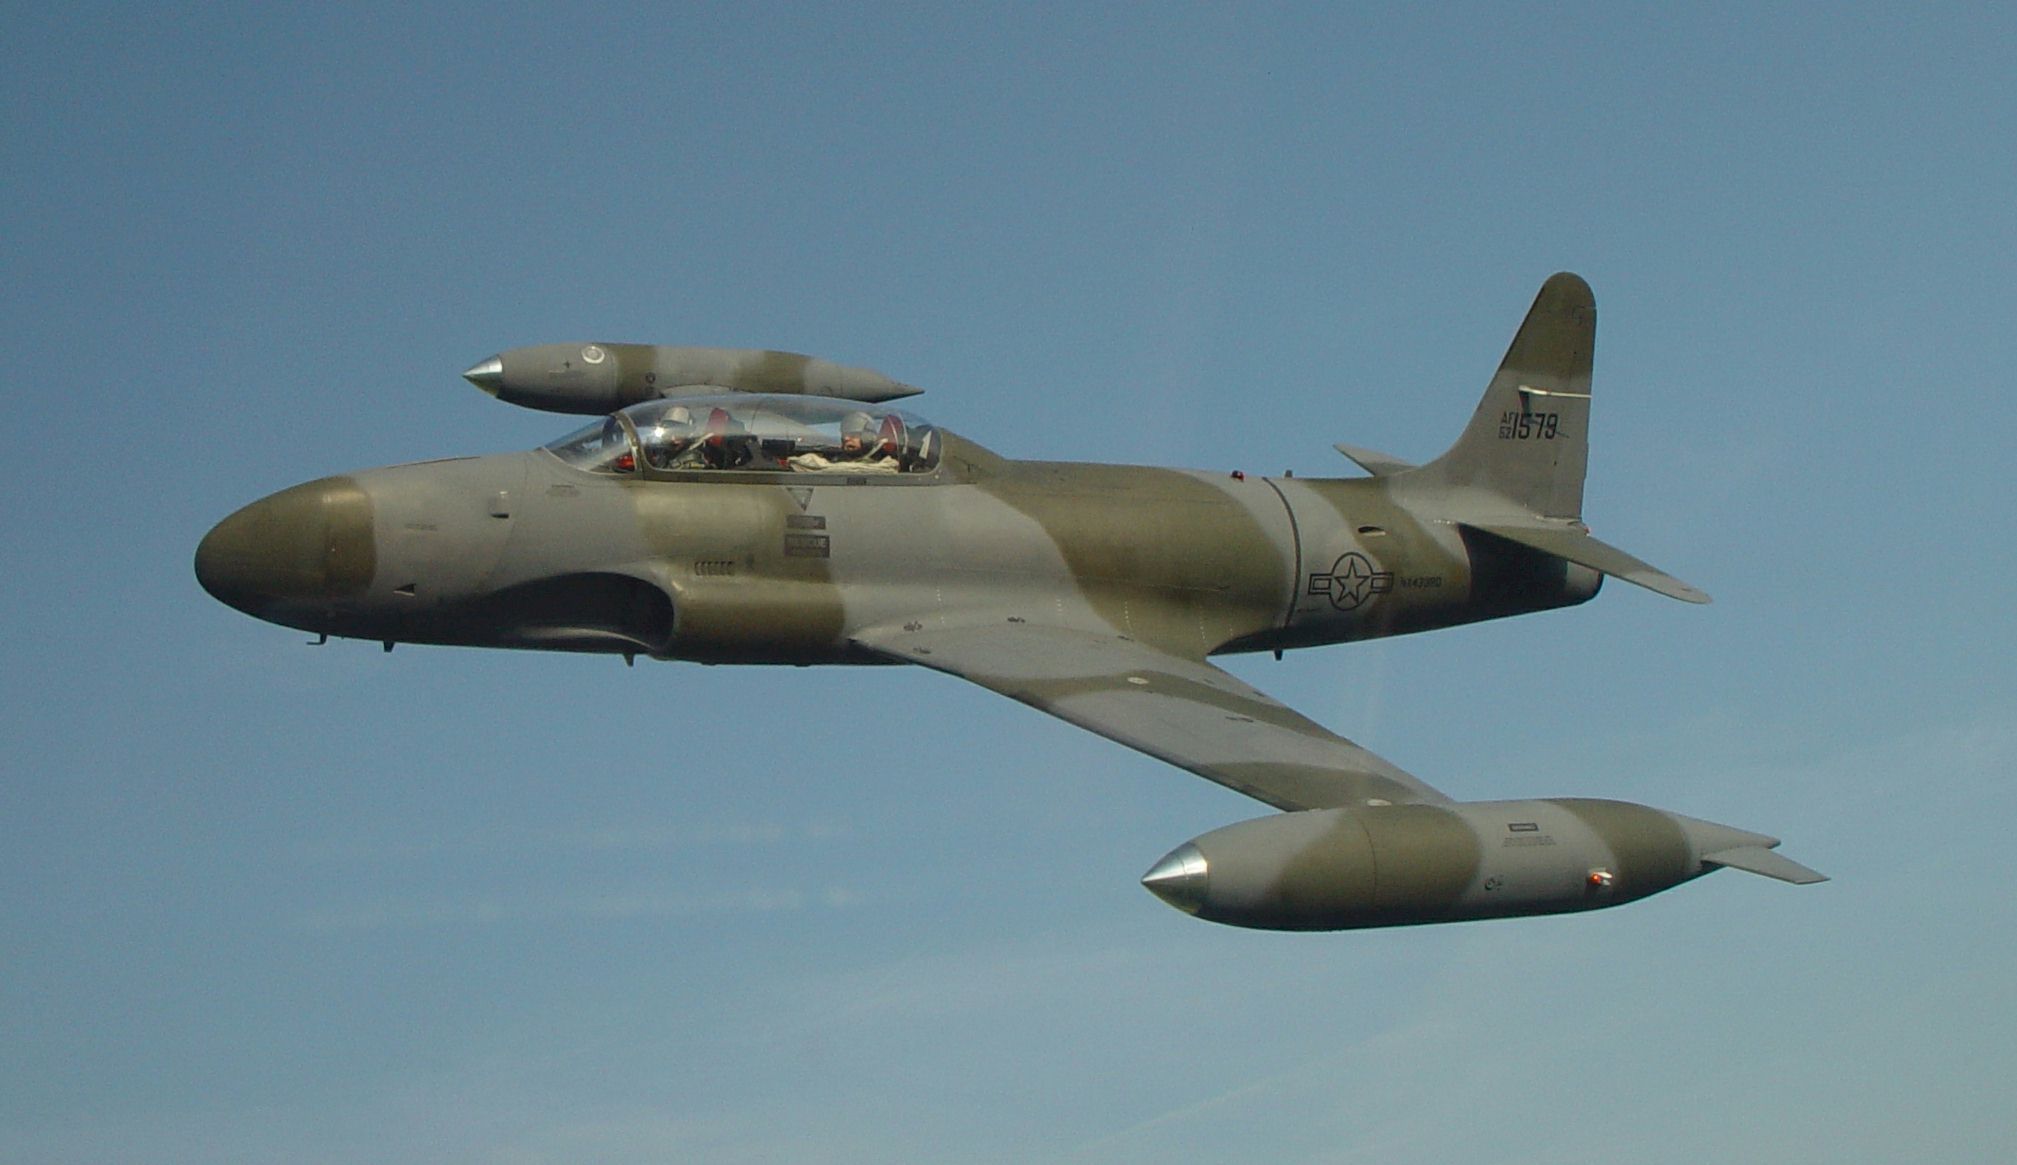 An image of the Canadair ct-133 silver star